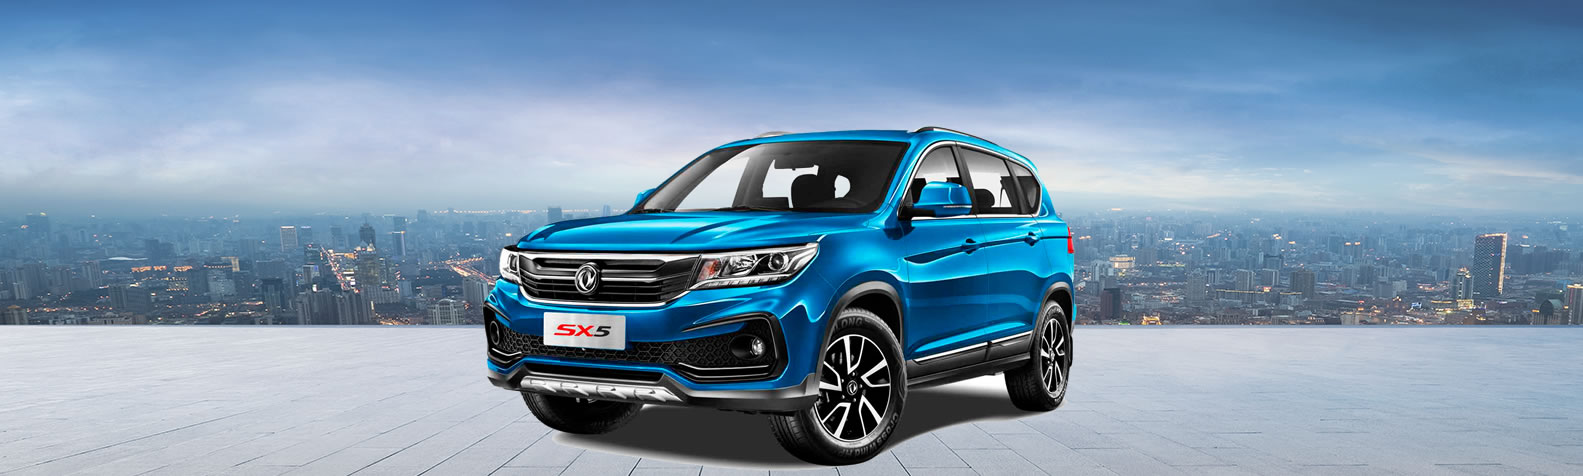 DONGFENG_SX5_